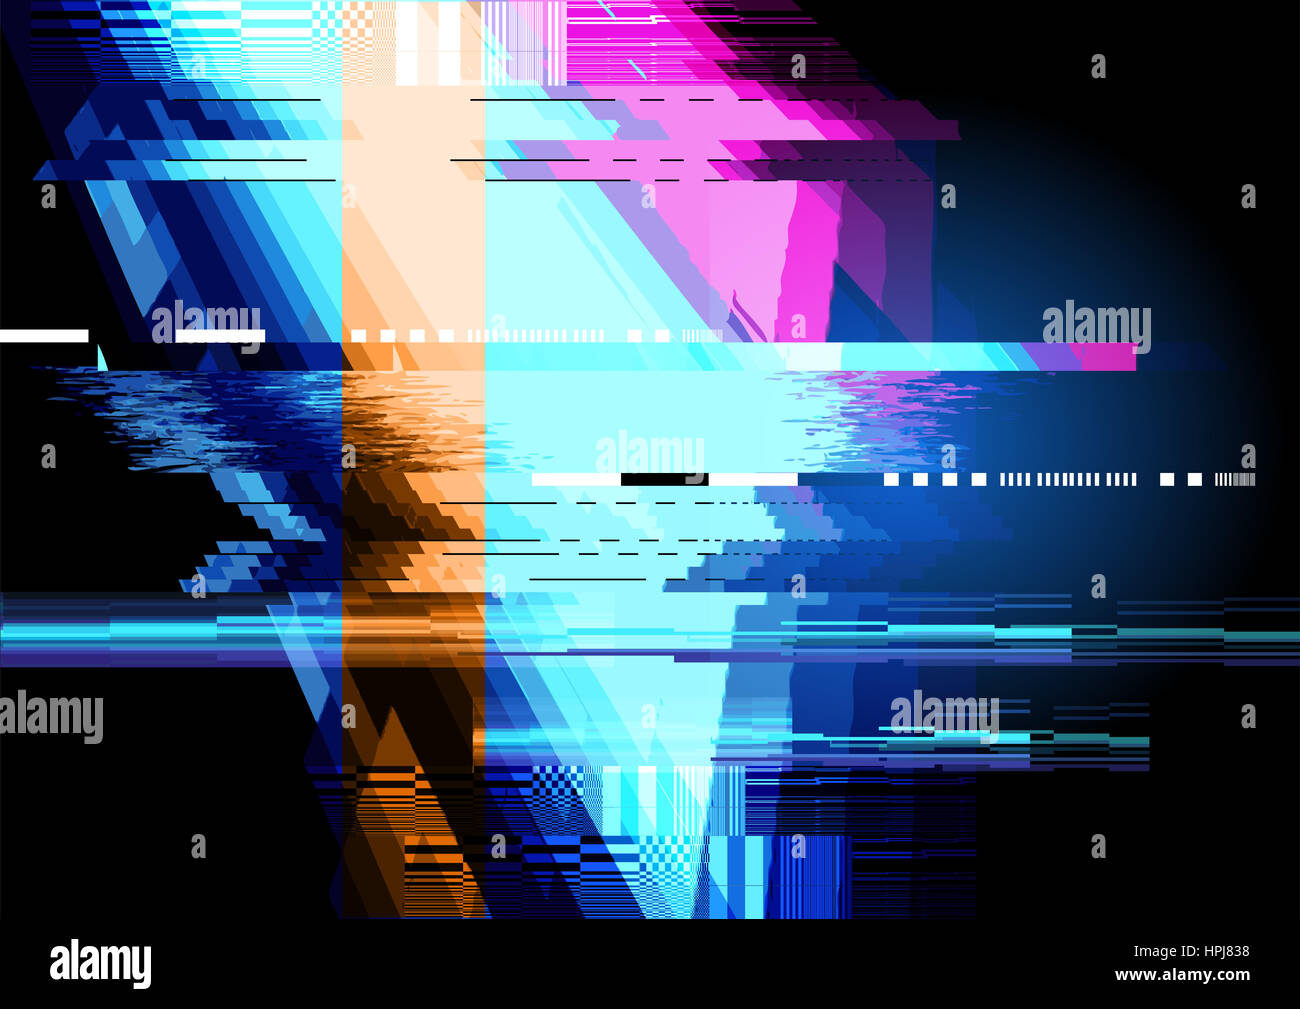 Glitched and distorted texture pattern background. Vector illustration Stock Photo